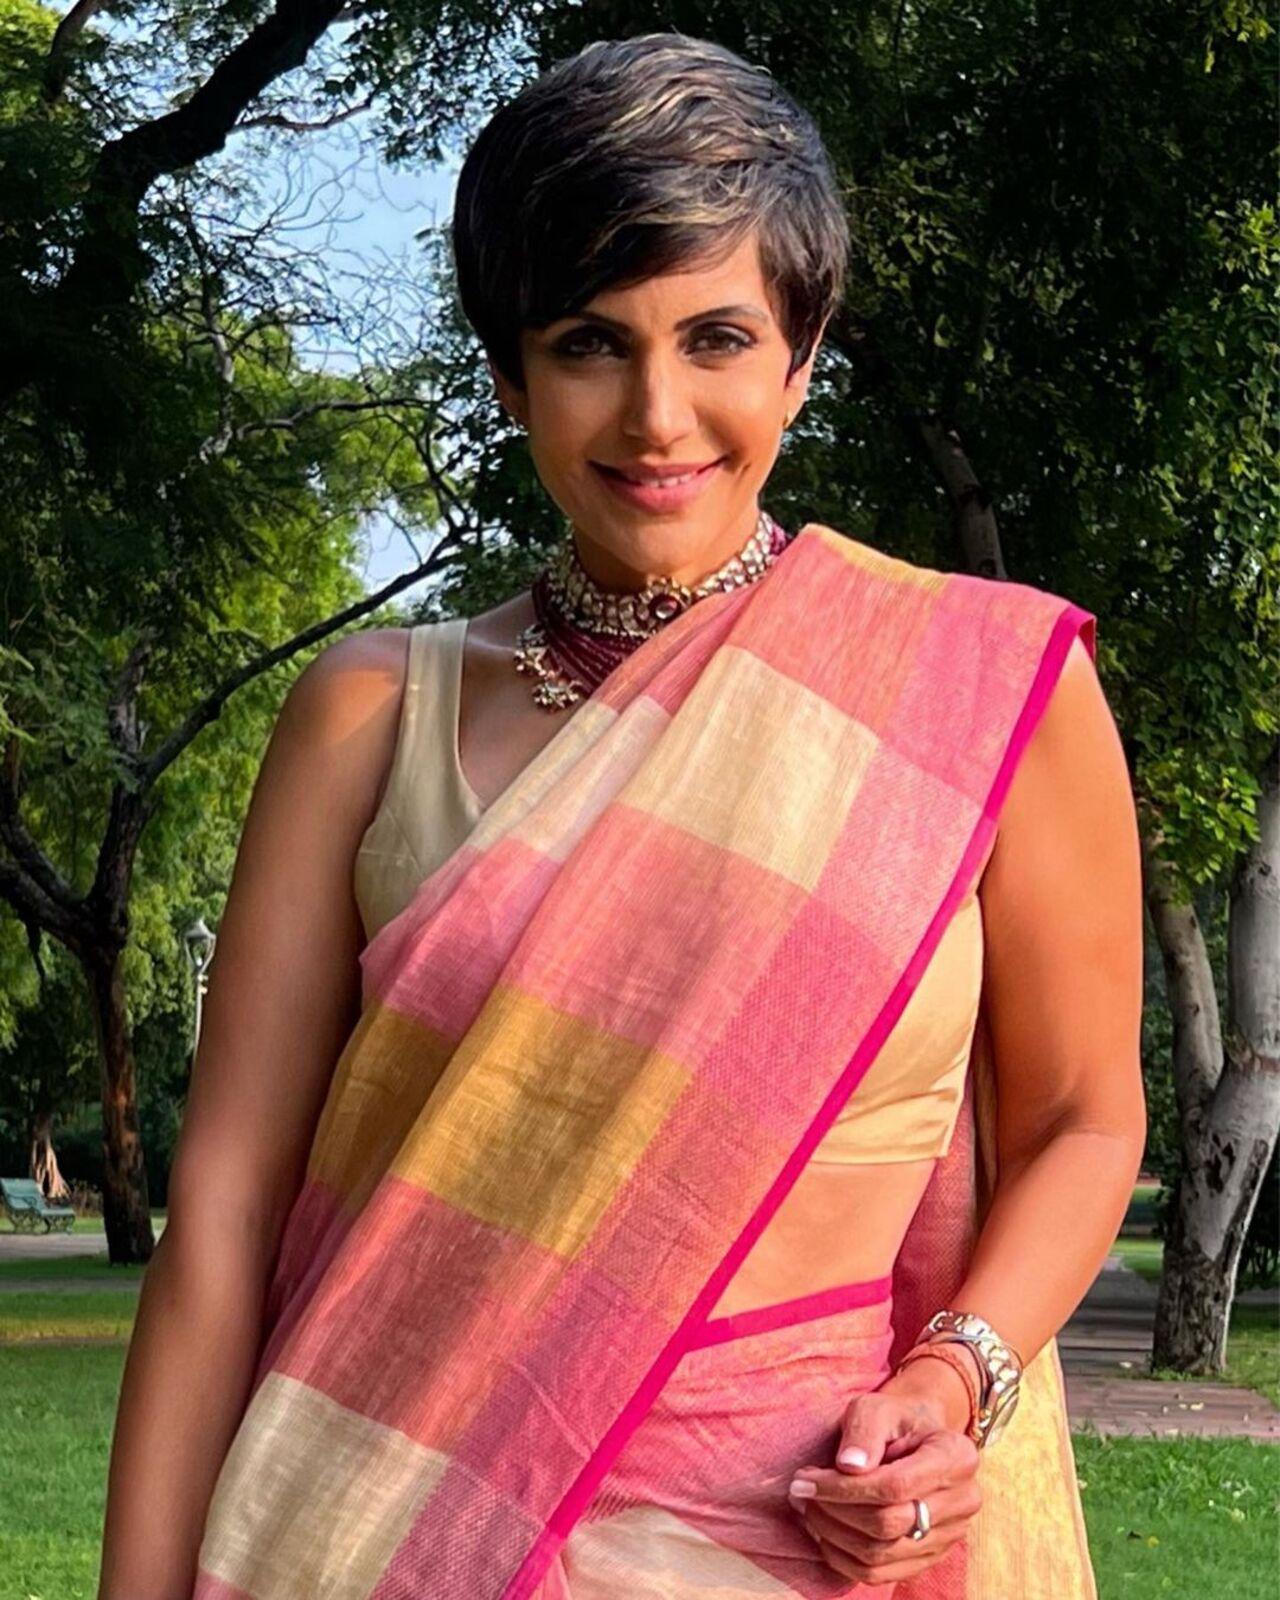 Mandira is known for her work in movies like 'Dilwale Dulhania Le Jayenge', 'Meerabai Not Out', and 'Vodka Diaries'. She has also been a part of shows like 'Kyunki Saas Bhi Kabhi Bahu Thi', and 'Jassi Jaissi Koi Nahin', to name a few. 